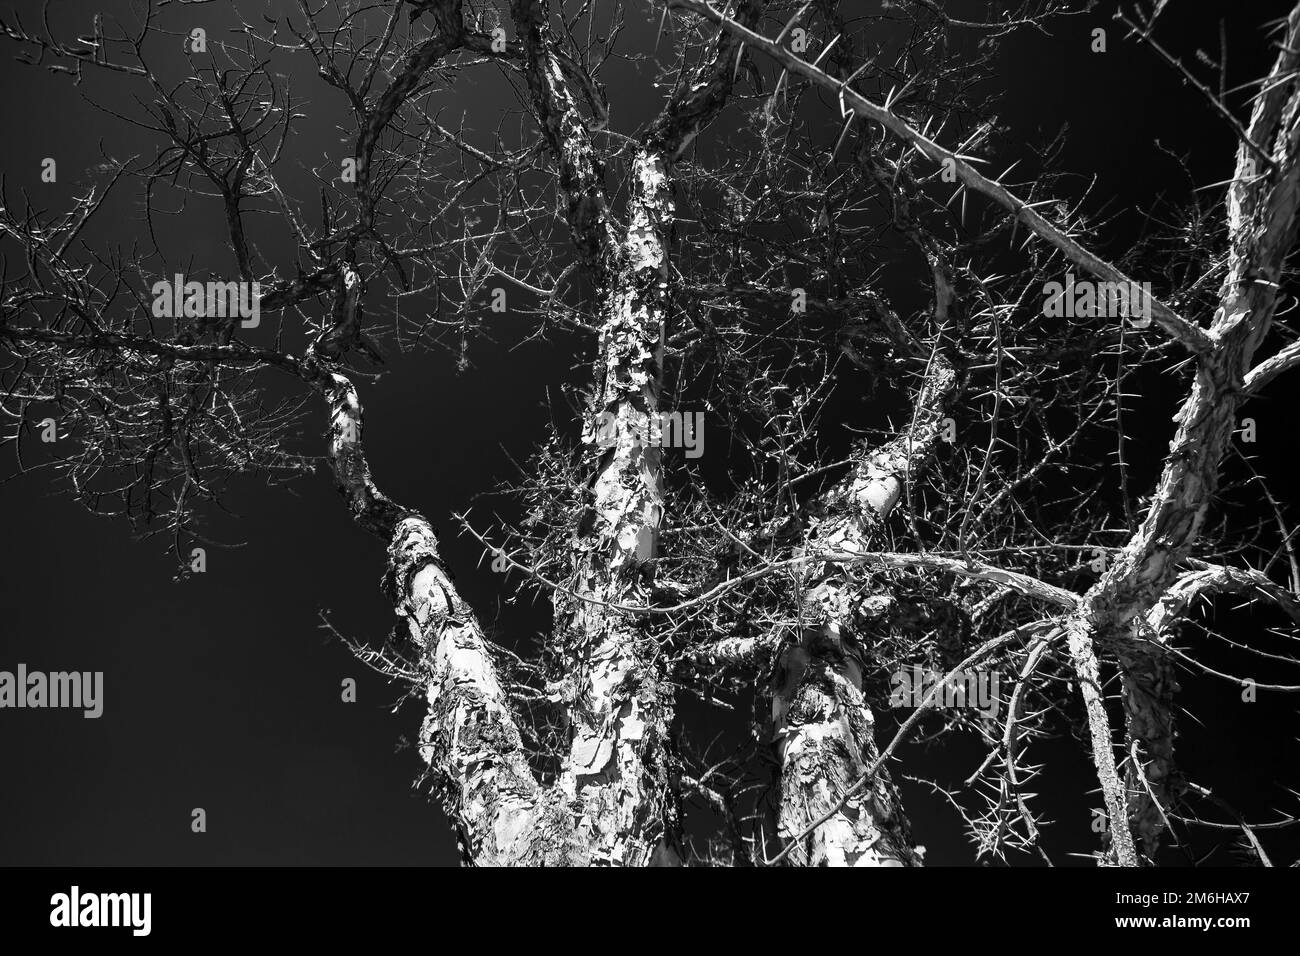 Abstract monochrome image of the Paperbark Thorn (Acasia siberiana) in winter. Stock Photo